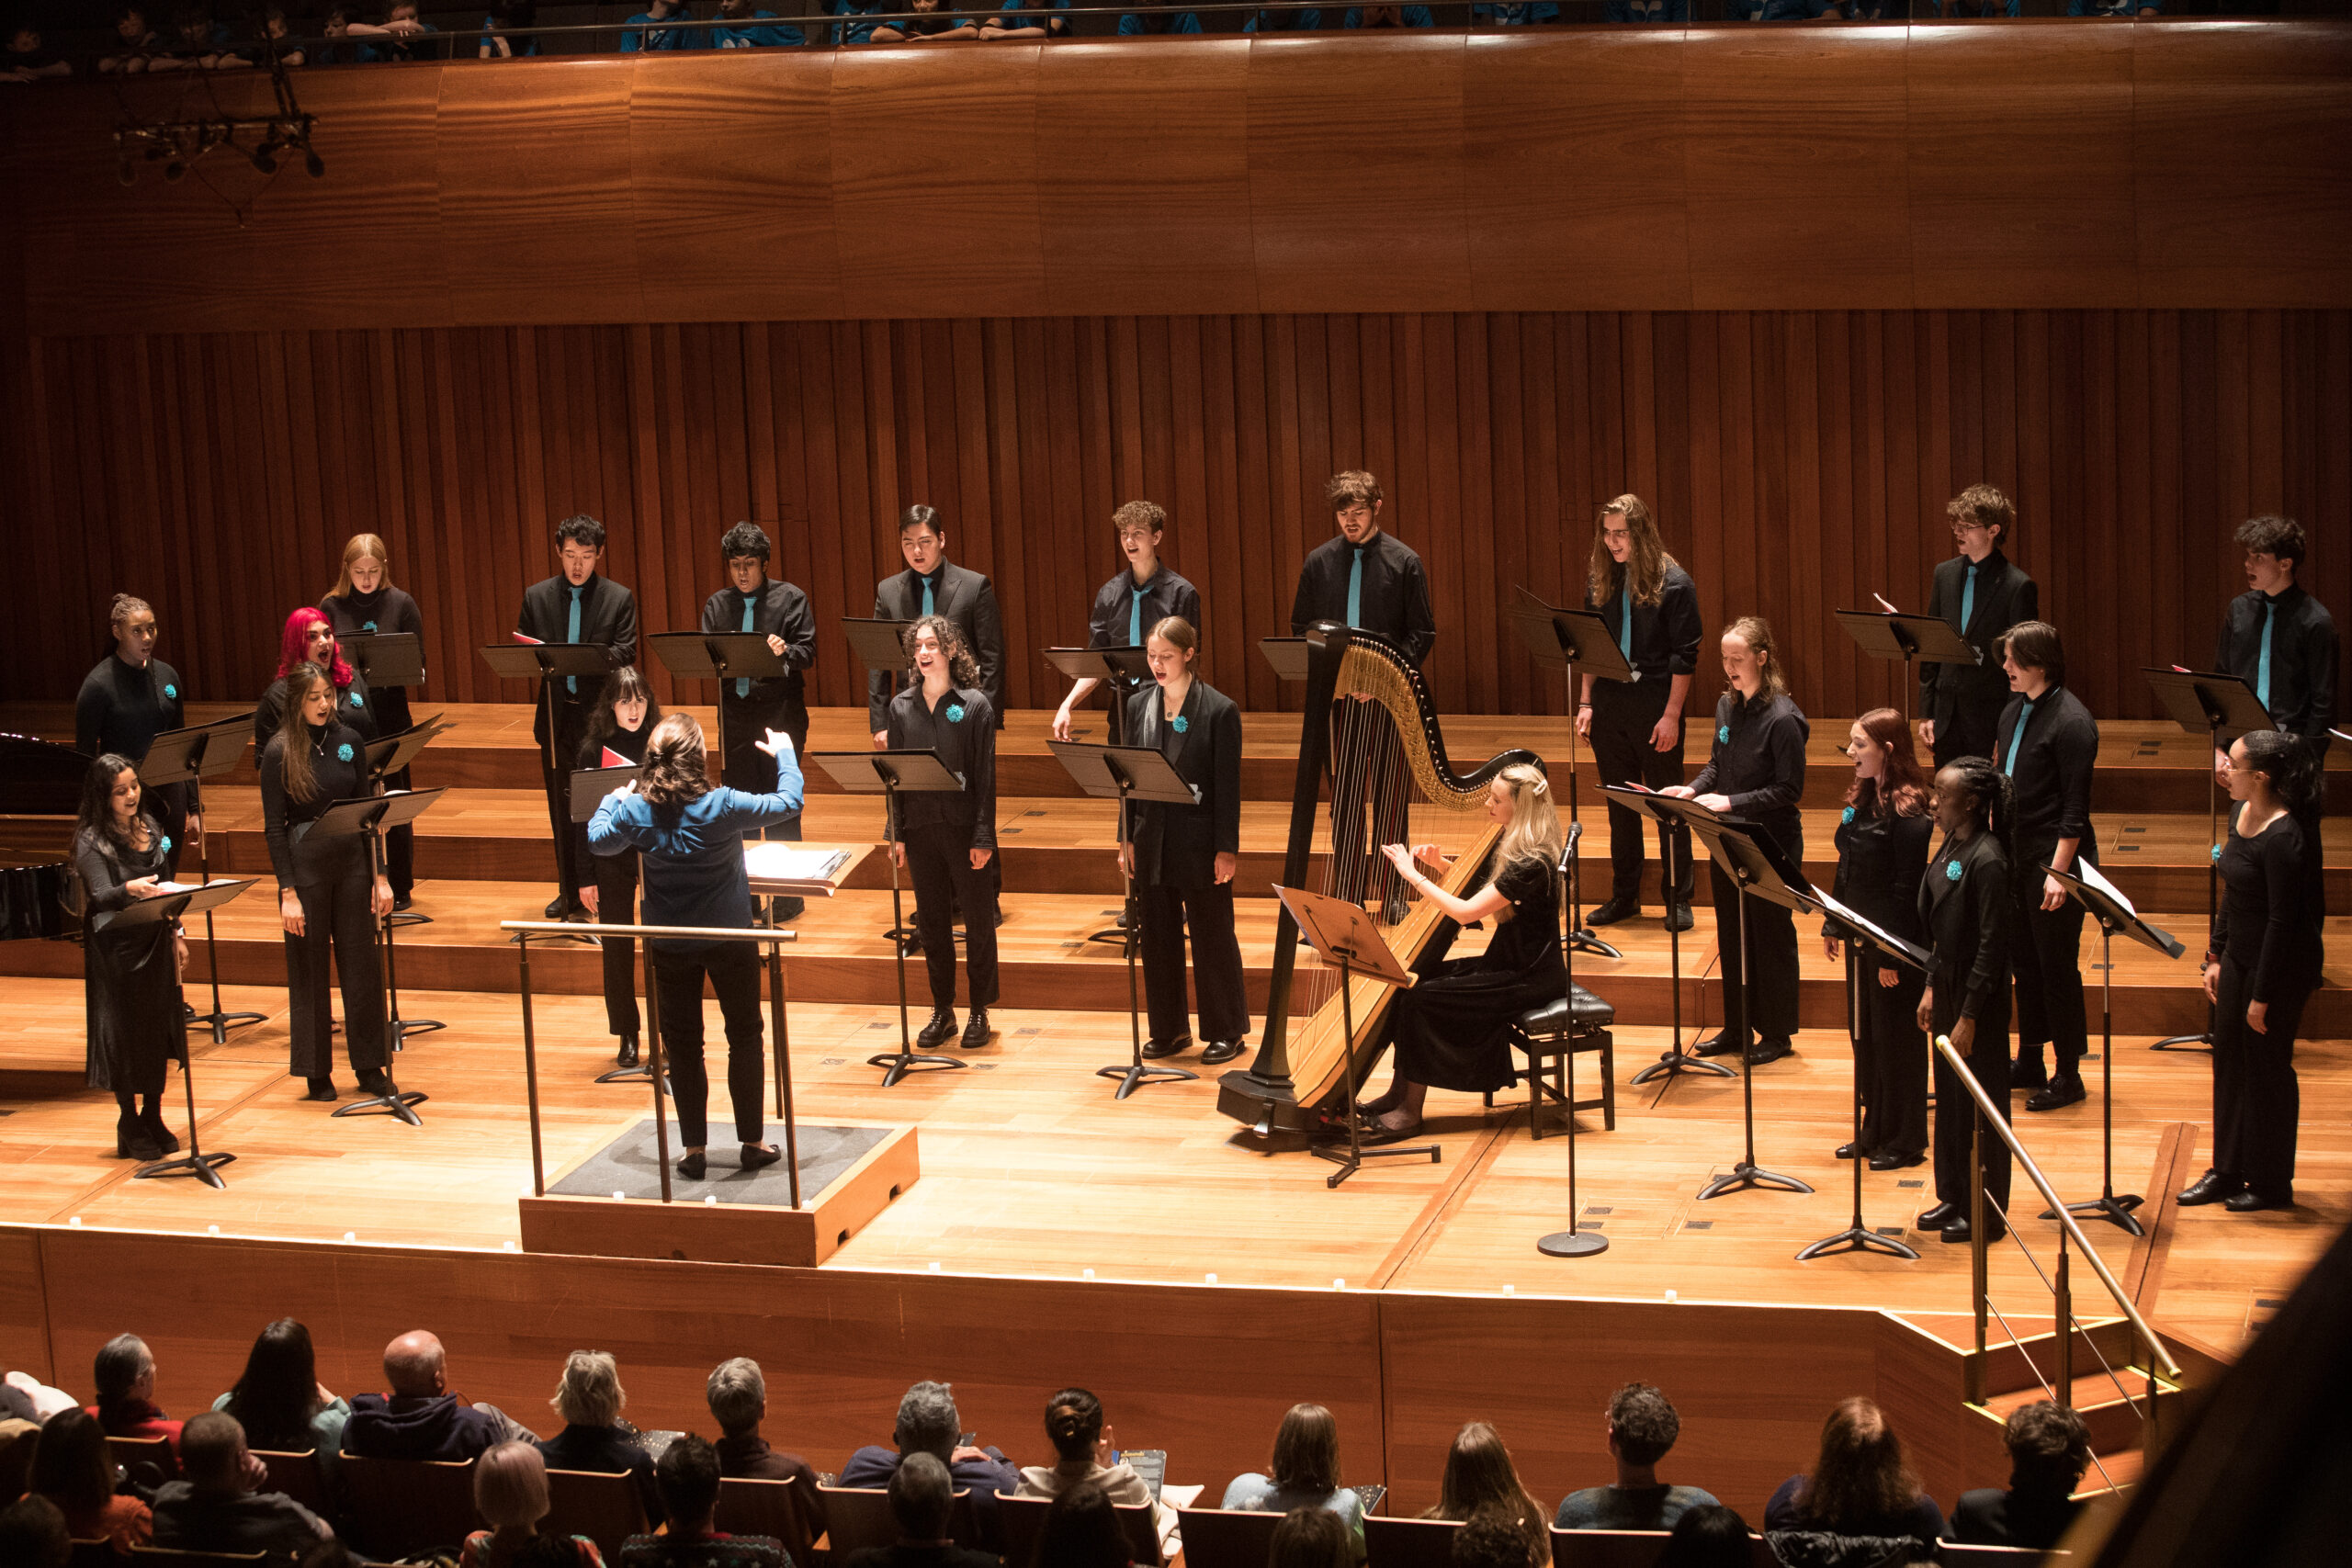 LYC Chamber Choir standing in two rows on a concert hall stage, each with a music stand. They are wearing black concert dress with teal accessories. The conductor is in front of them wearing a blue blouse and a harpist is sitting to the right of the conductor.